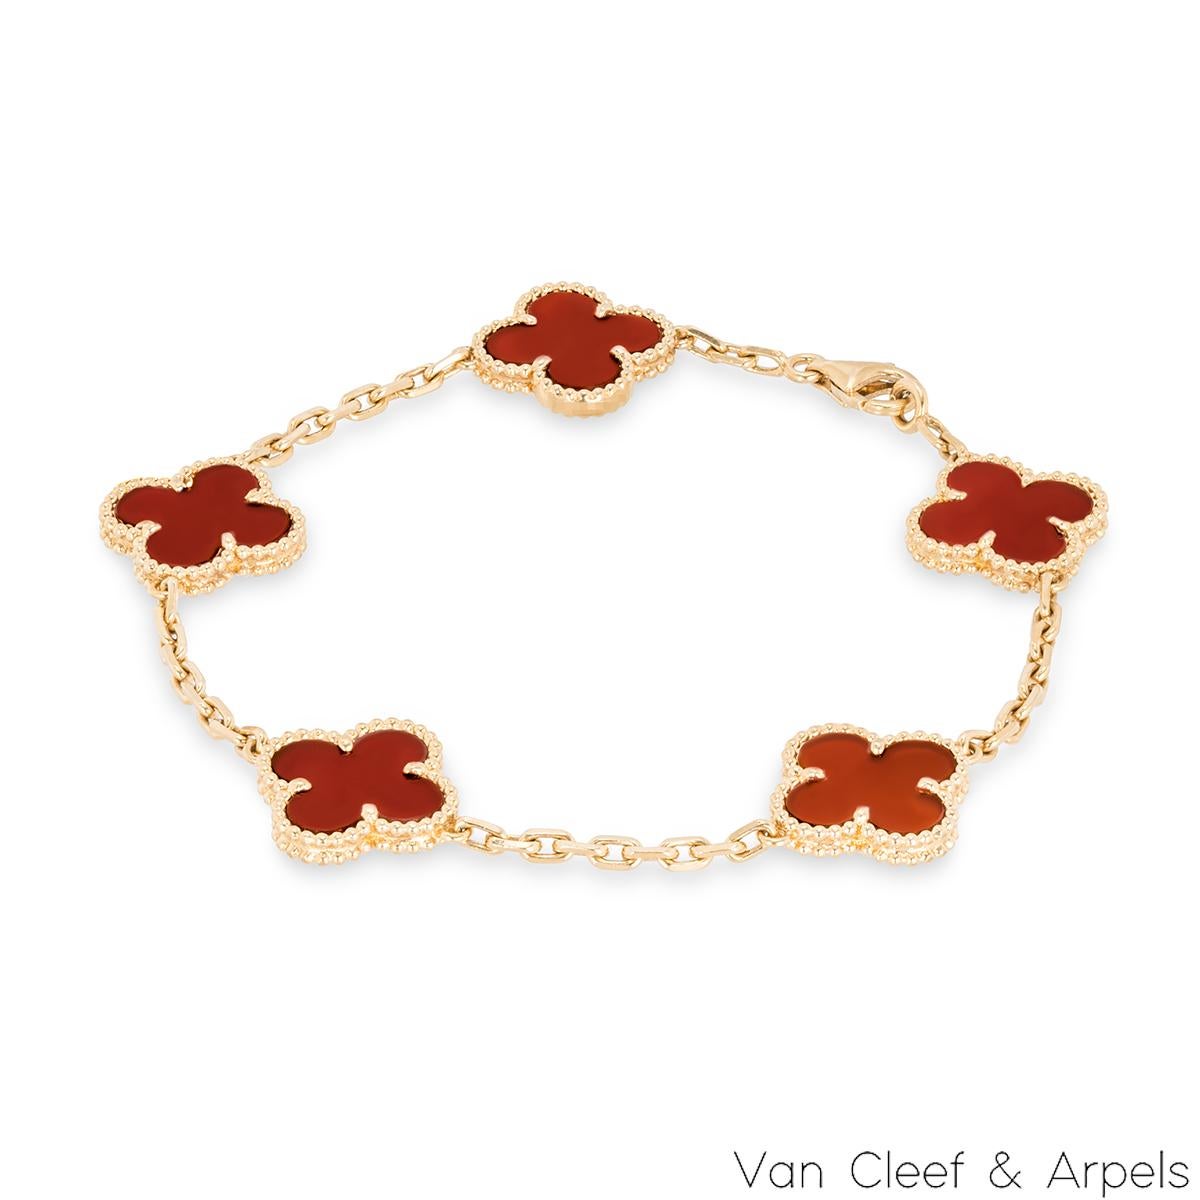 A lovely 18k yellow gold carnelian bracelet from the Vintage Alhambra collection by Van Cleef and Arpels. The bracelet features 5 iconic clover motifs, each set with a beaded edge and a carnelian inlay, set throughout the length of the chain. The